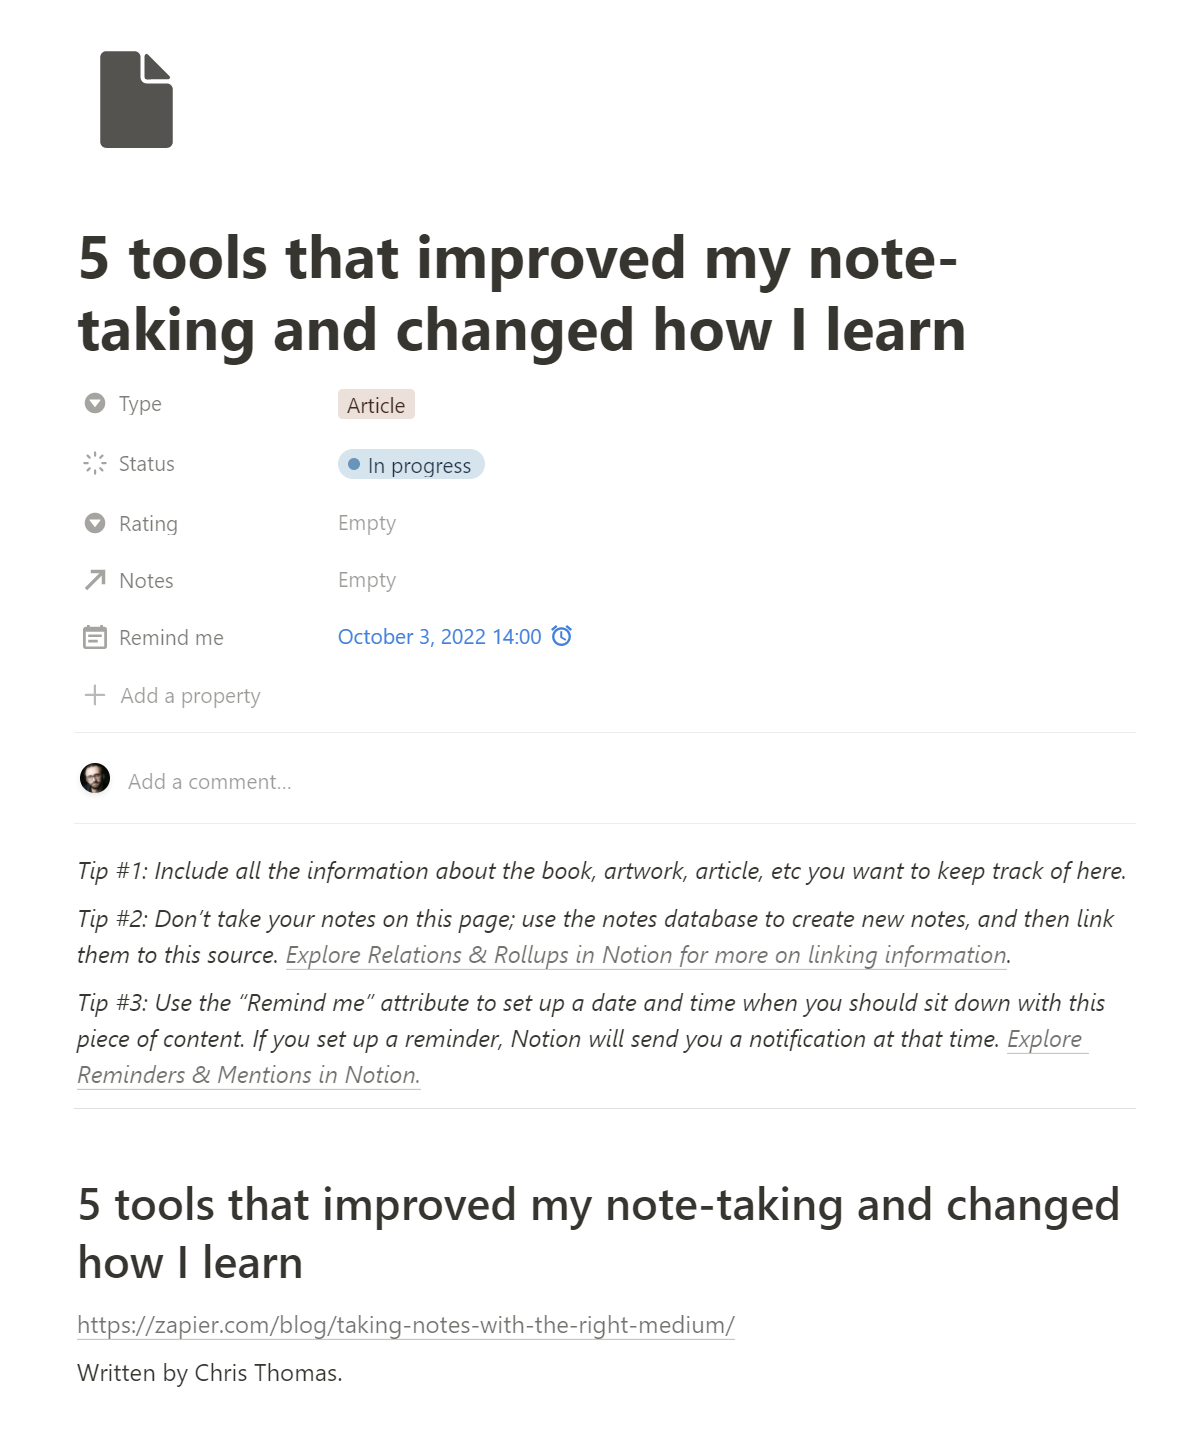 How to Build a Second Brain: Another Way to Organise Your Notes